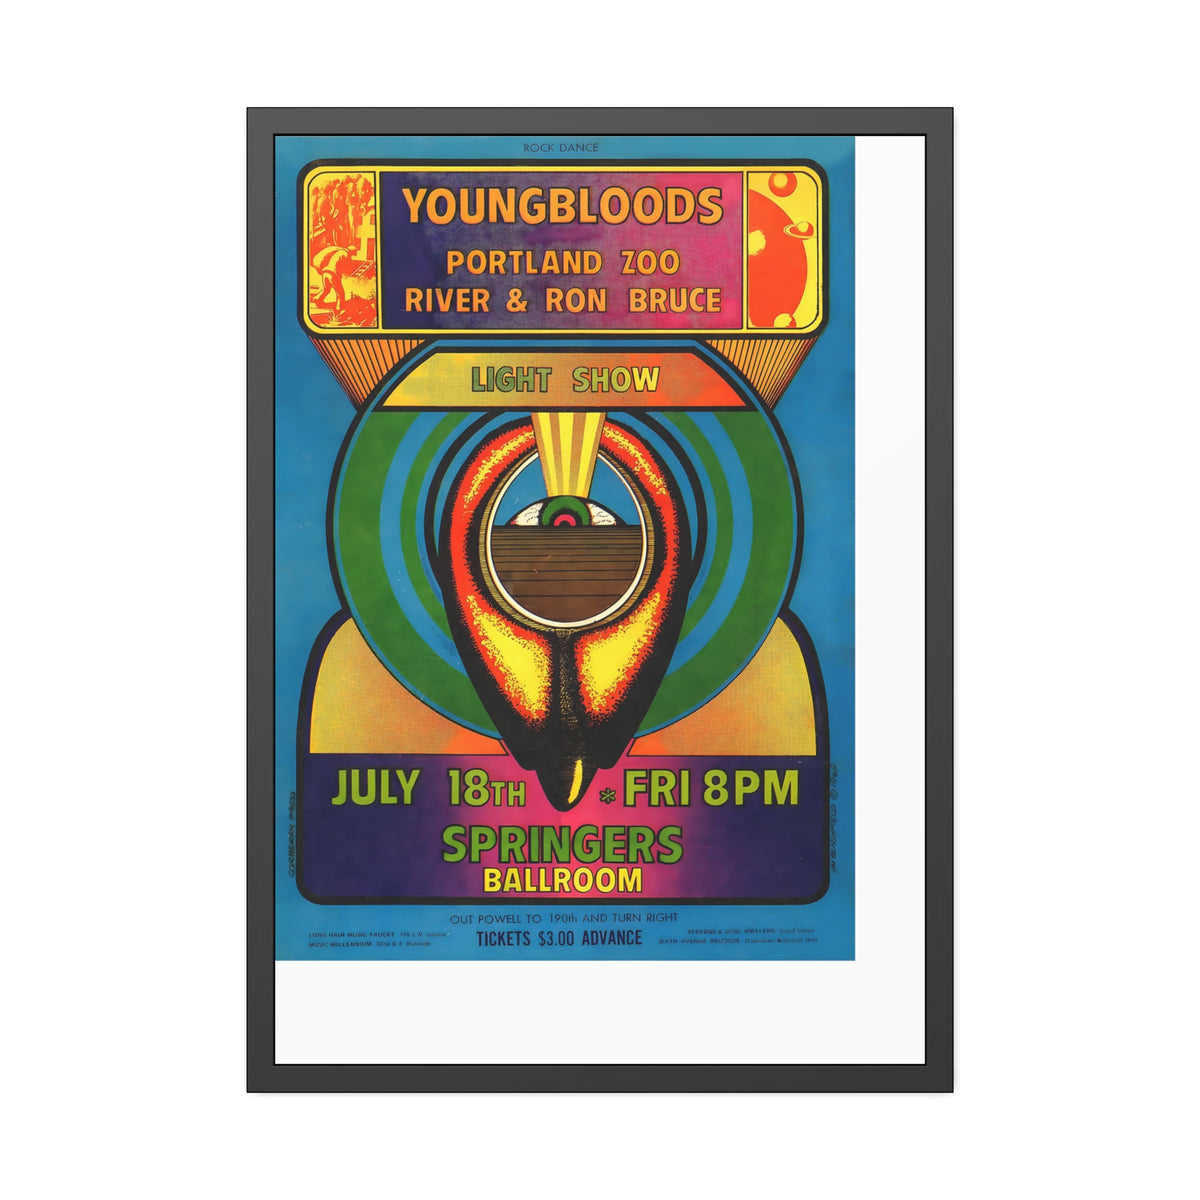 Youngbloods Concert Poster